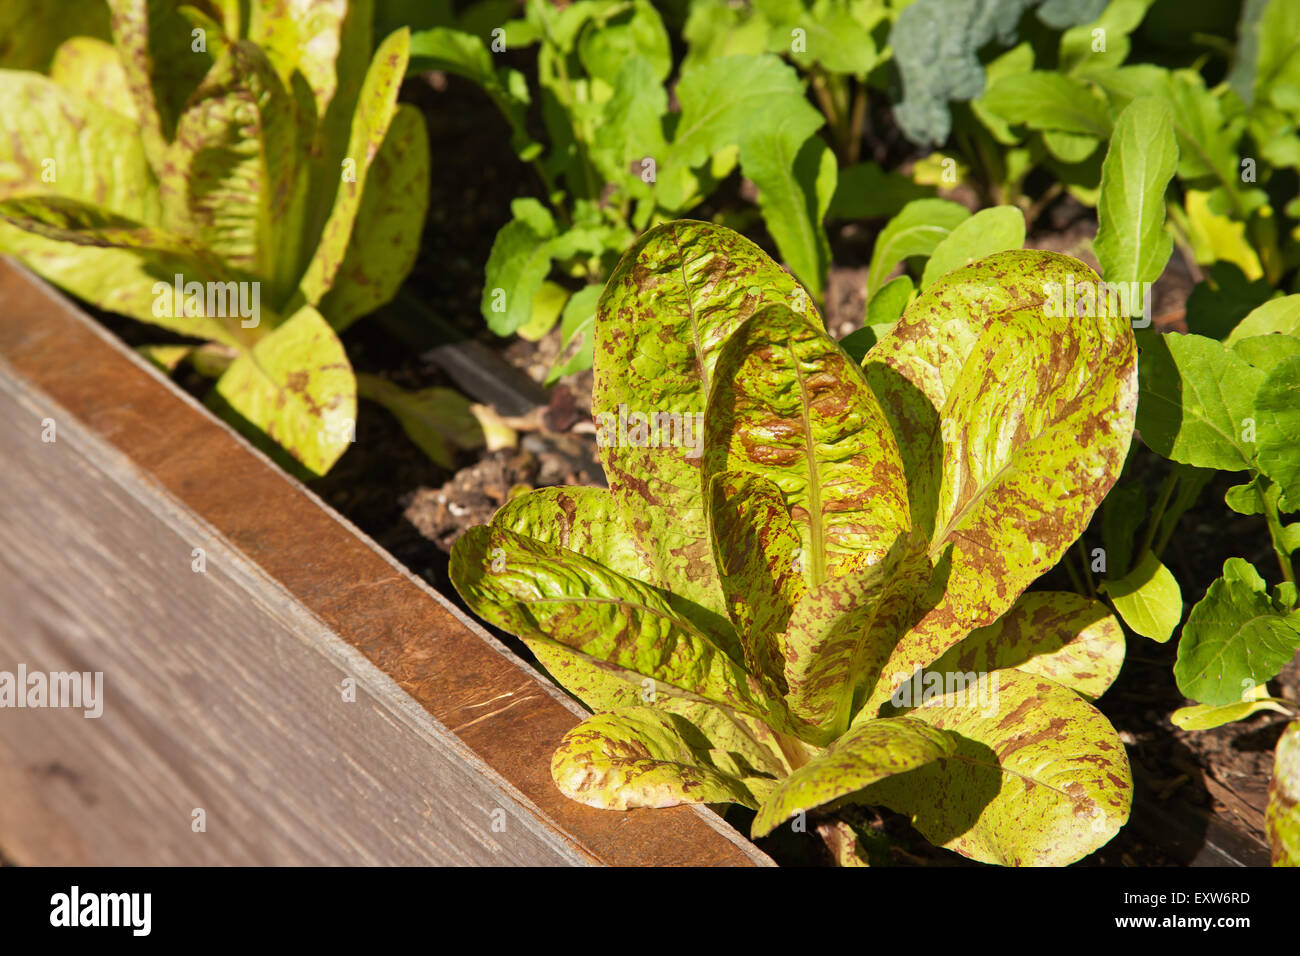 Flashy Trout's Back Lettuce plants growing in a raised bed vegetable garden in Issaquah, Washington, USA Stock Photo